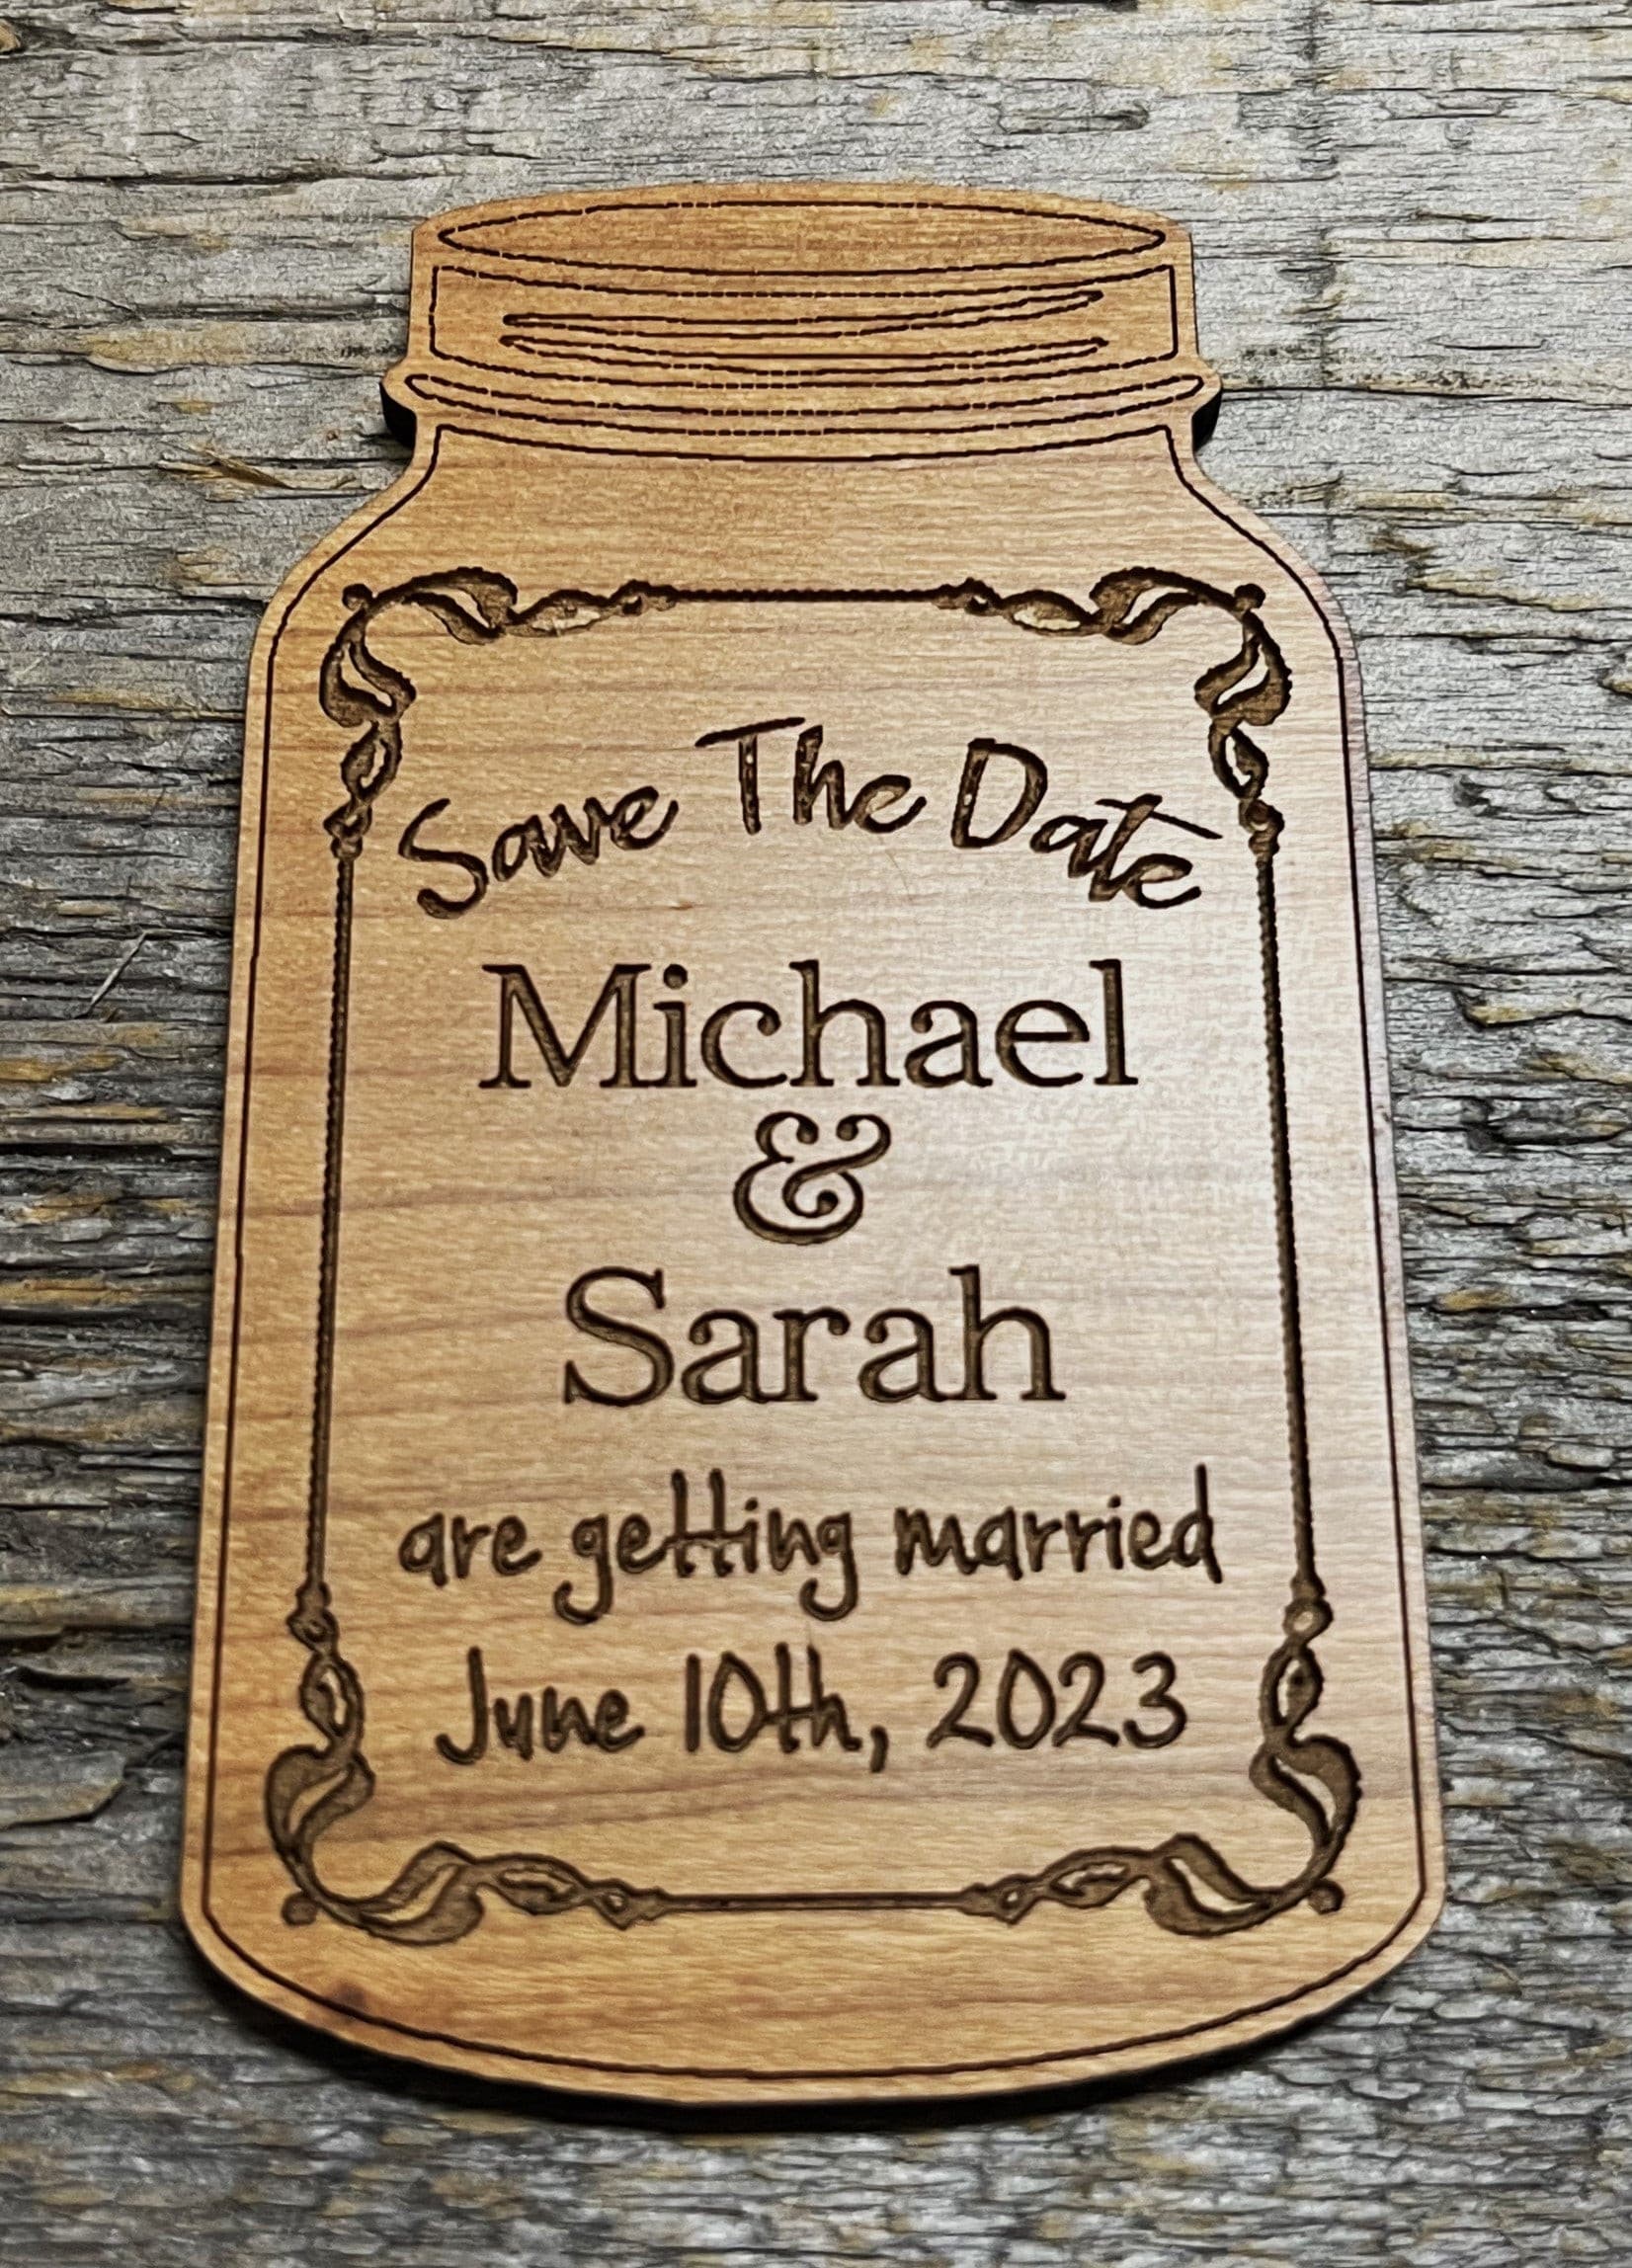 Save the Date Fridge Magnets.